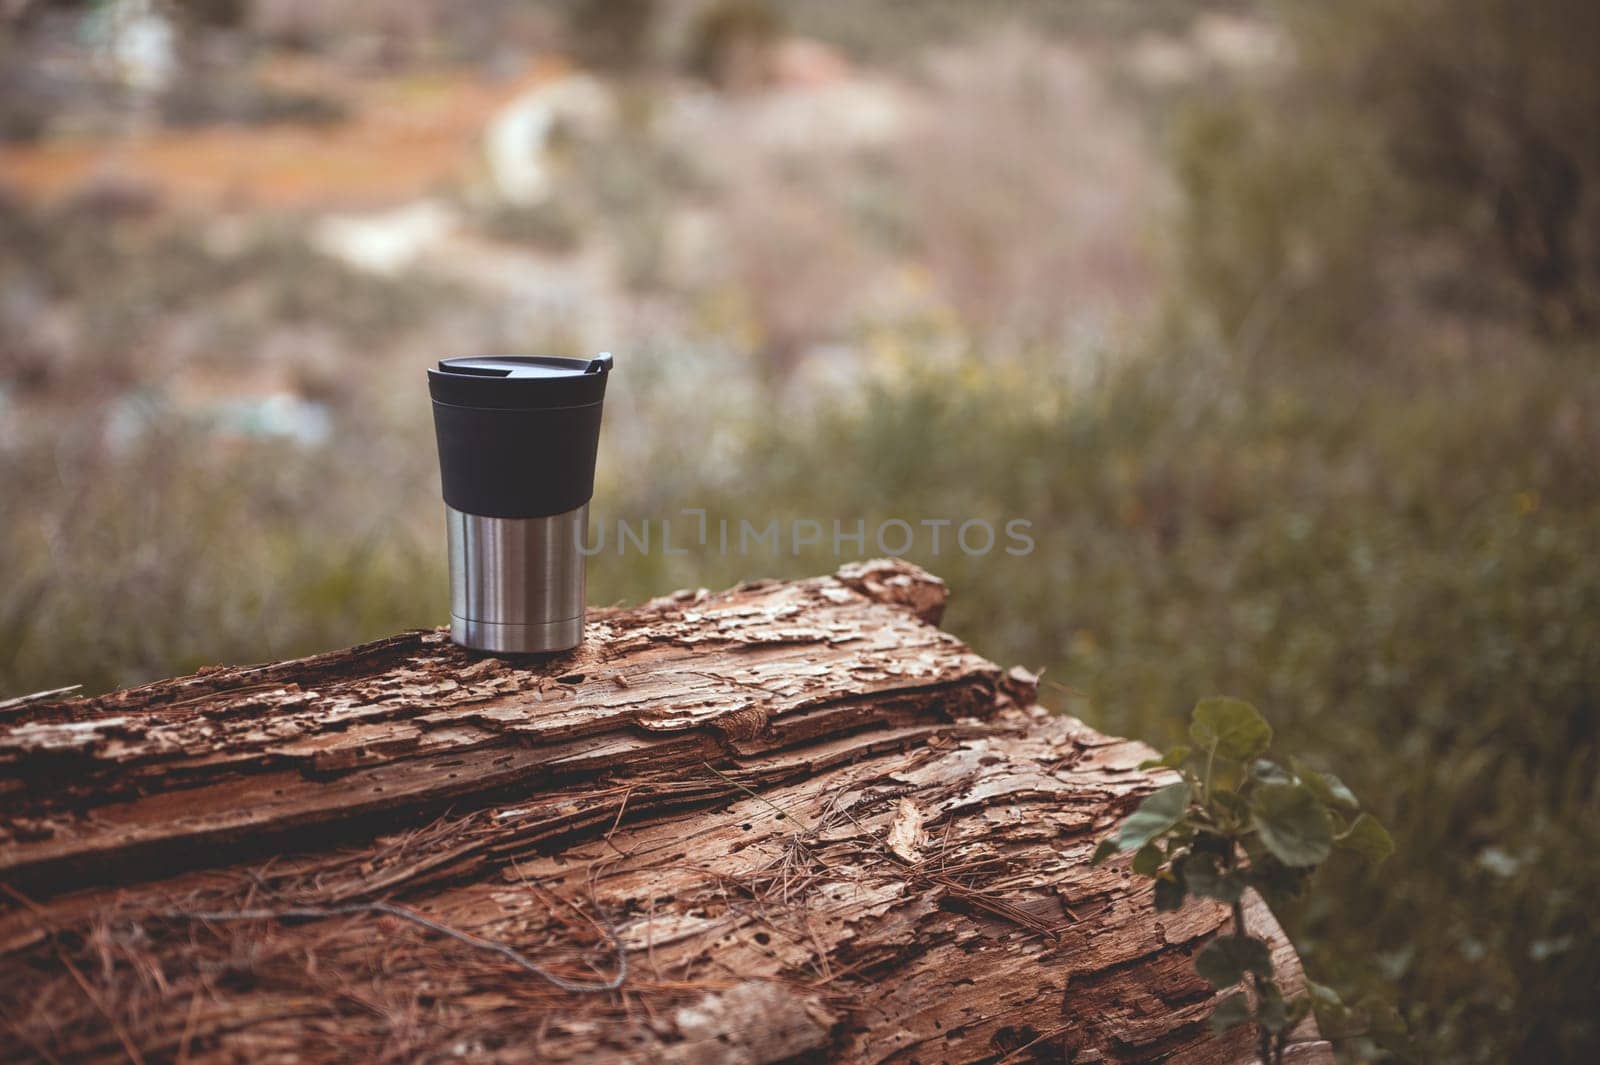 Still life with a stainless steel thermos mug on the log over beautiful early spring nature background by artgf